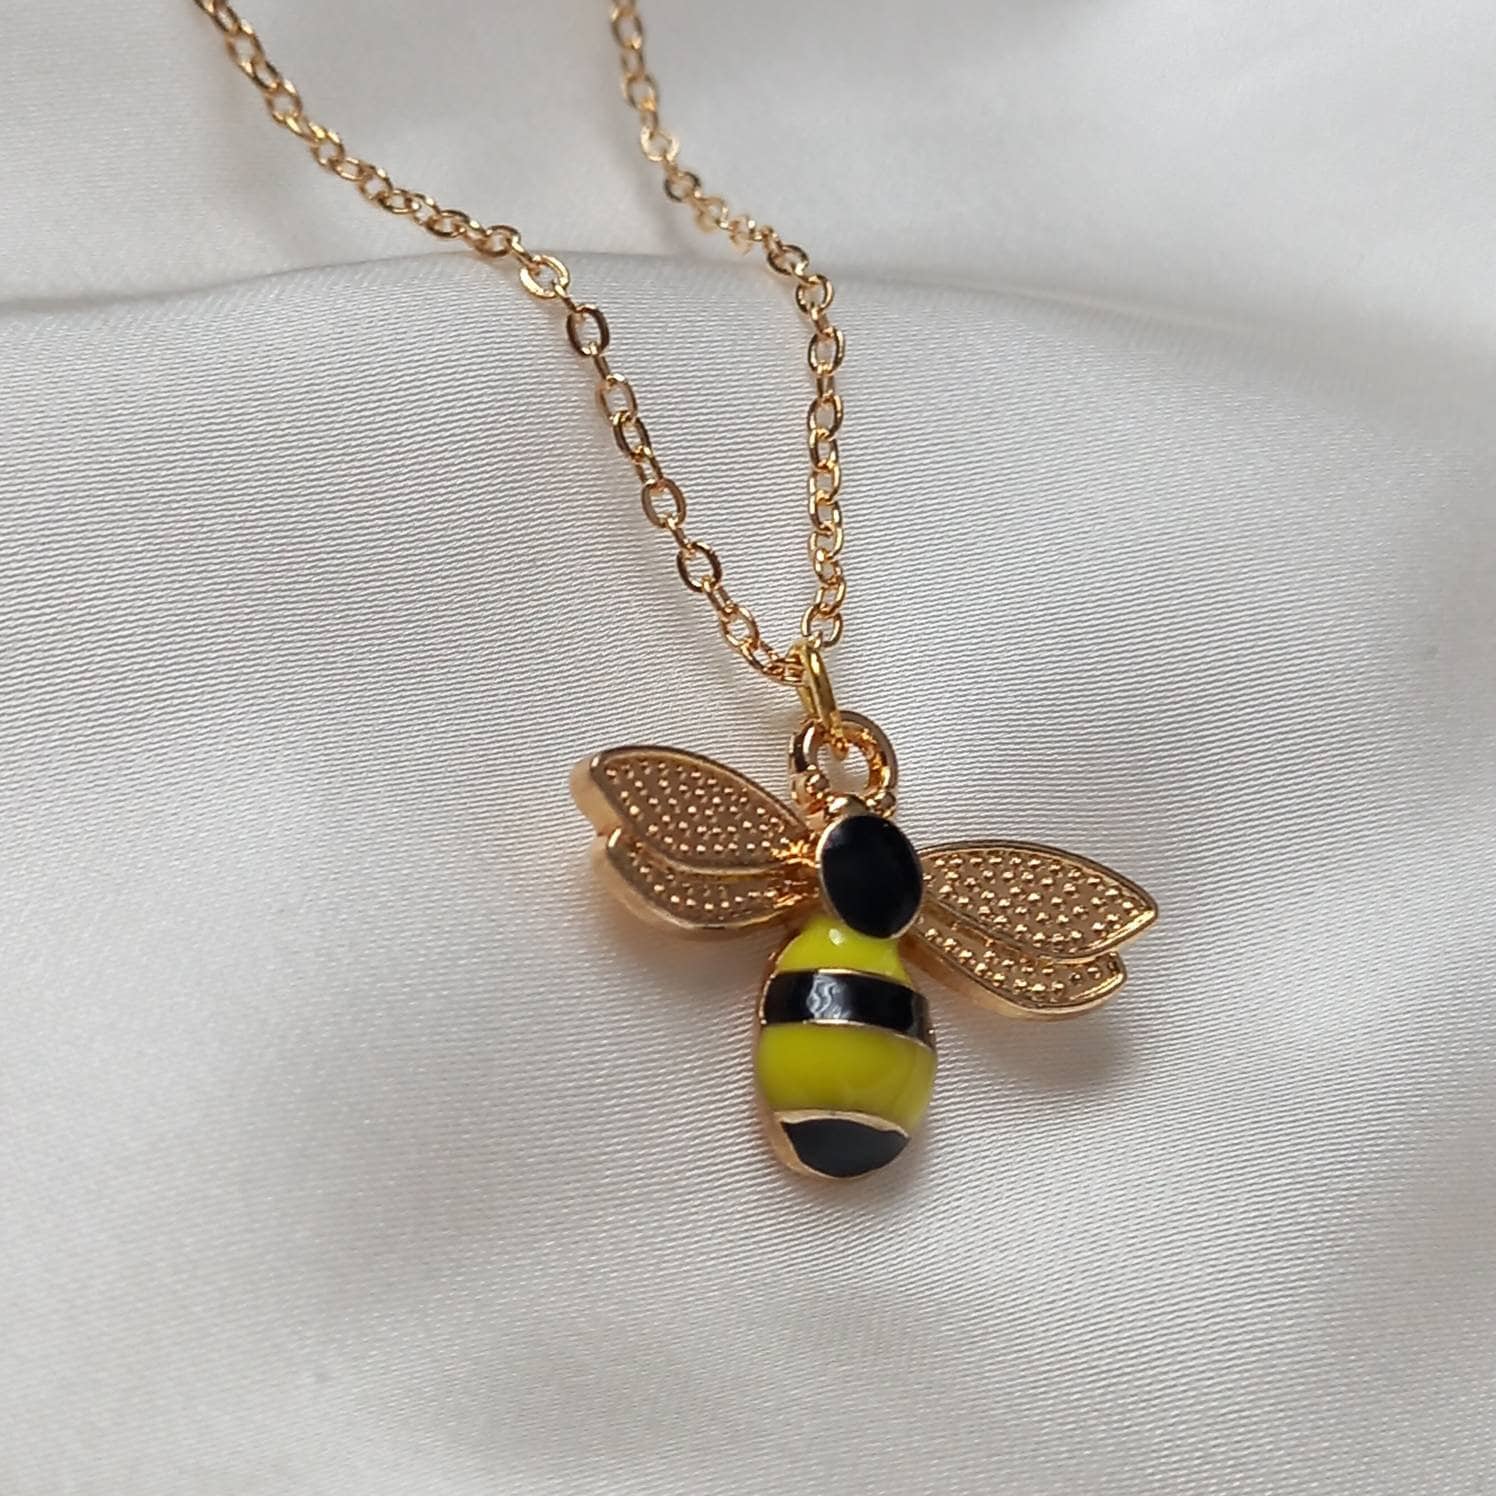 Bumblebee Necklace | MakerPlace by Michaels